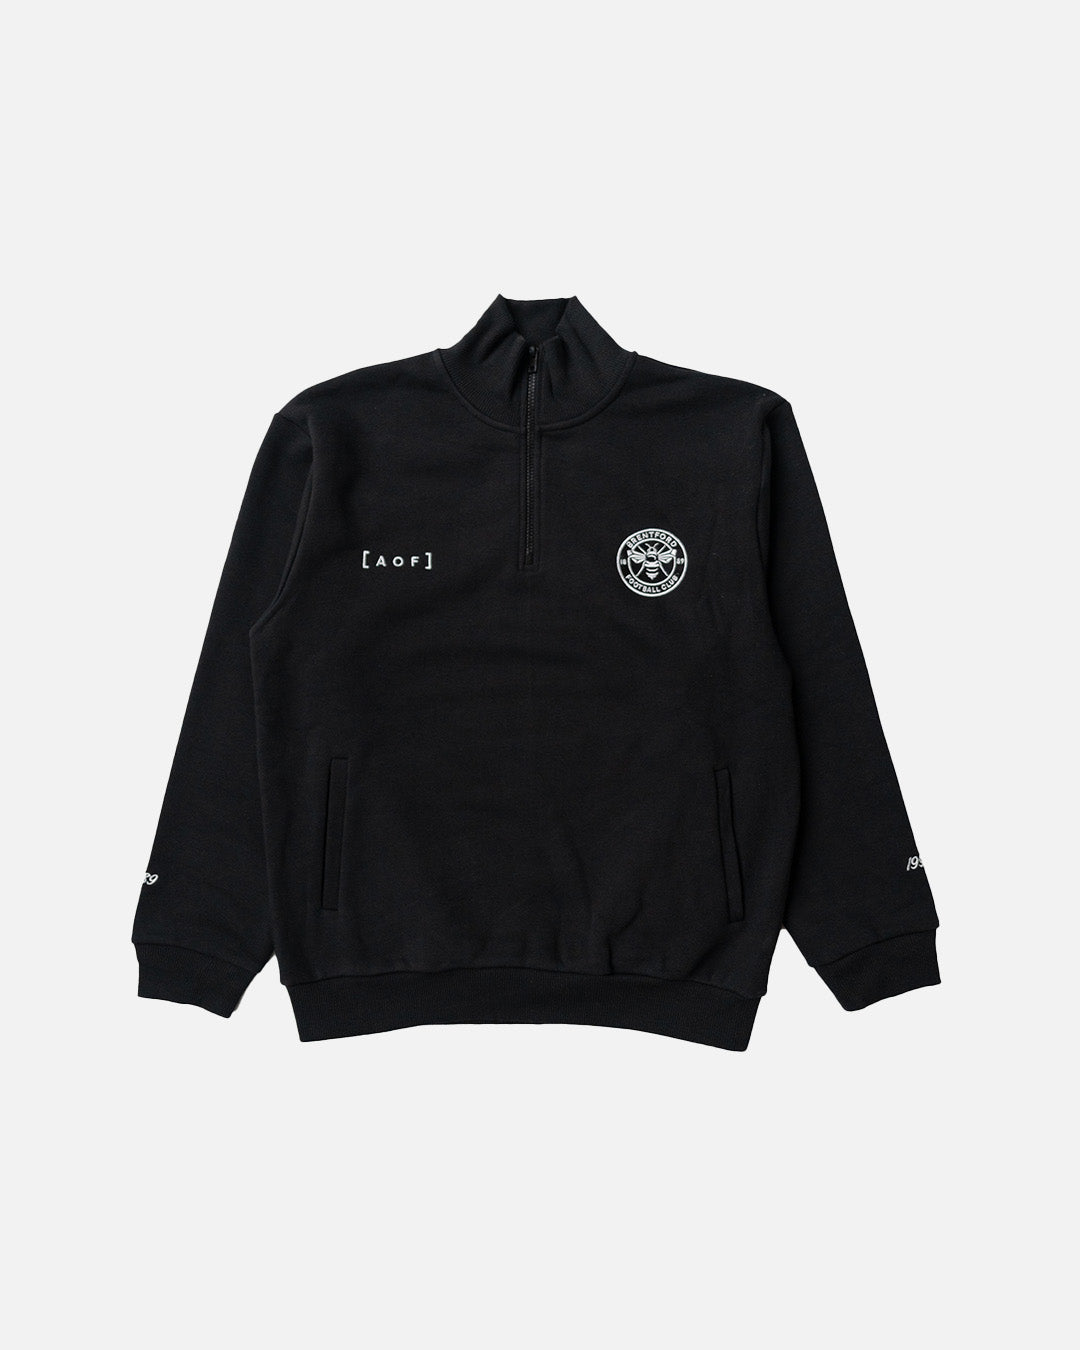 AOF x Brentford The Bees - Quarter-Zip